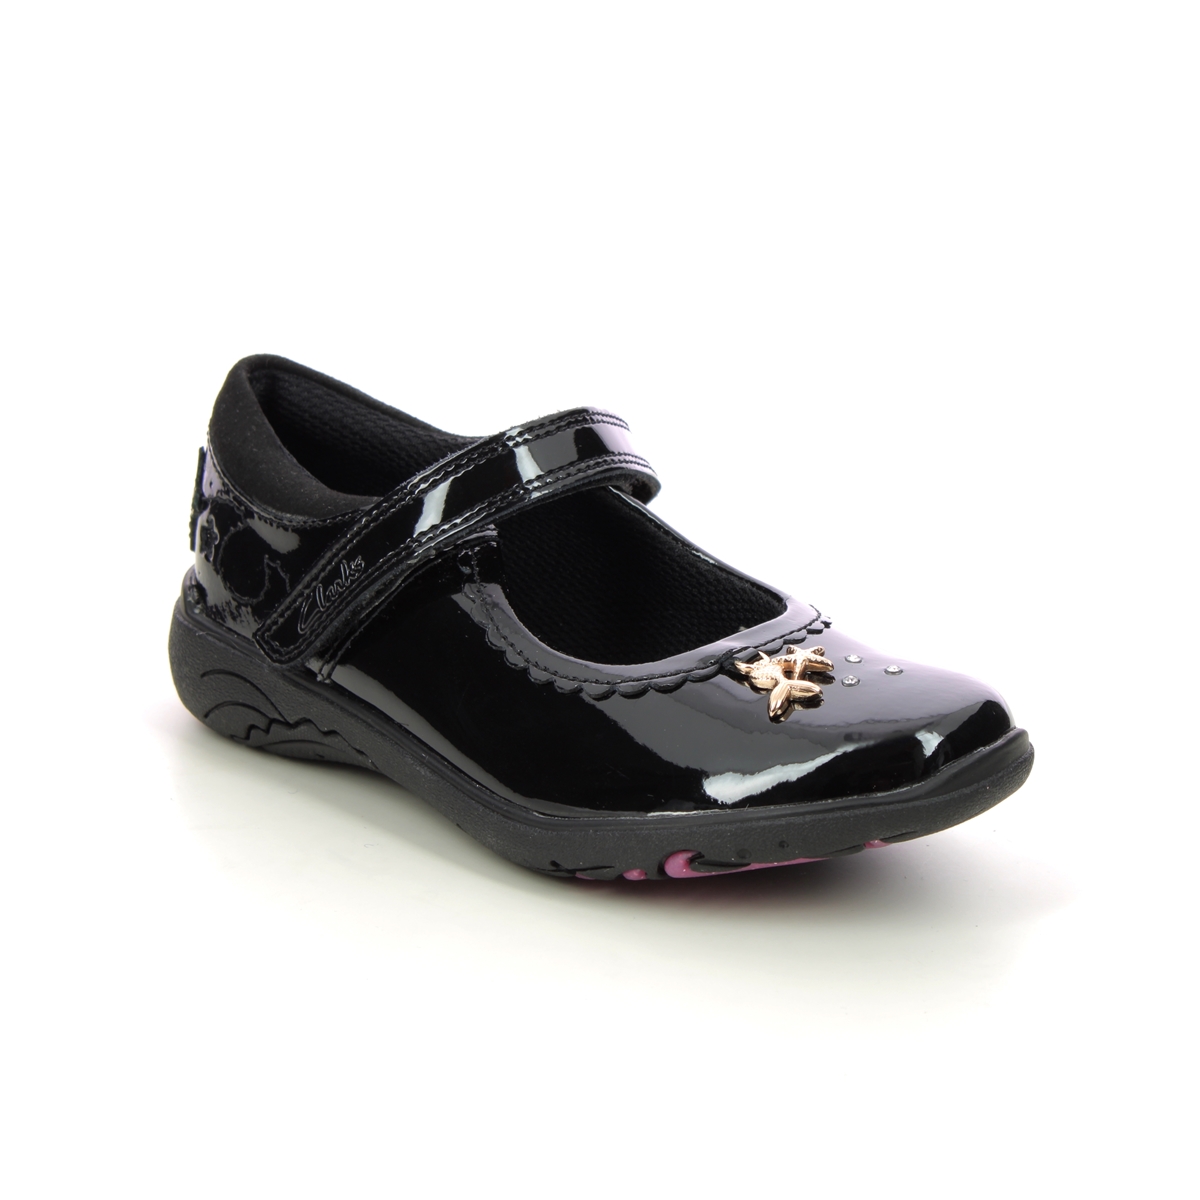 Clarks Relda Sea K Mary Jane Black Patent Kids Girls School Shoes 722418H In Size 9.5 In Plain Black Patent H Width Fitting Extra Wide For School For